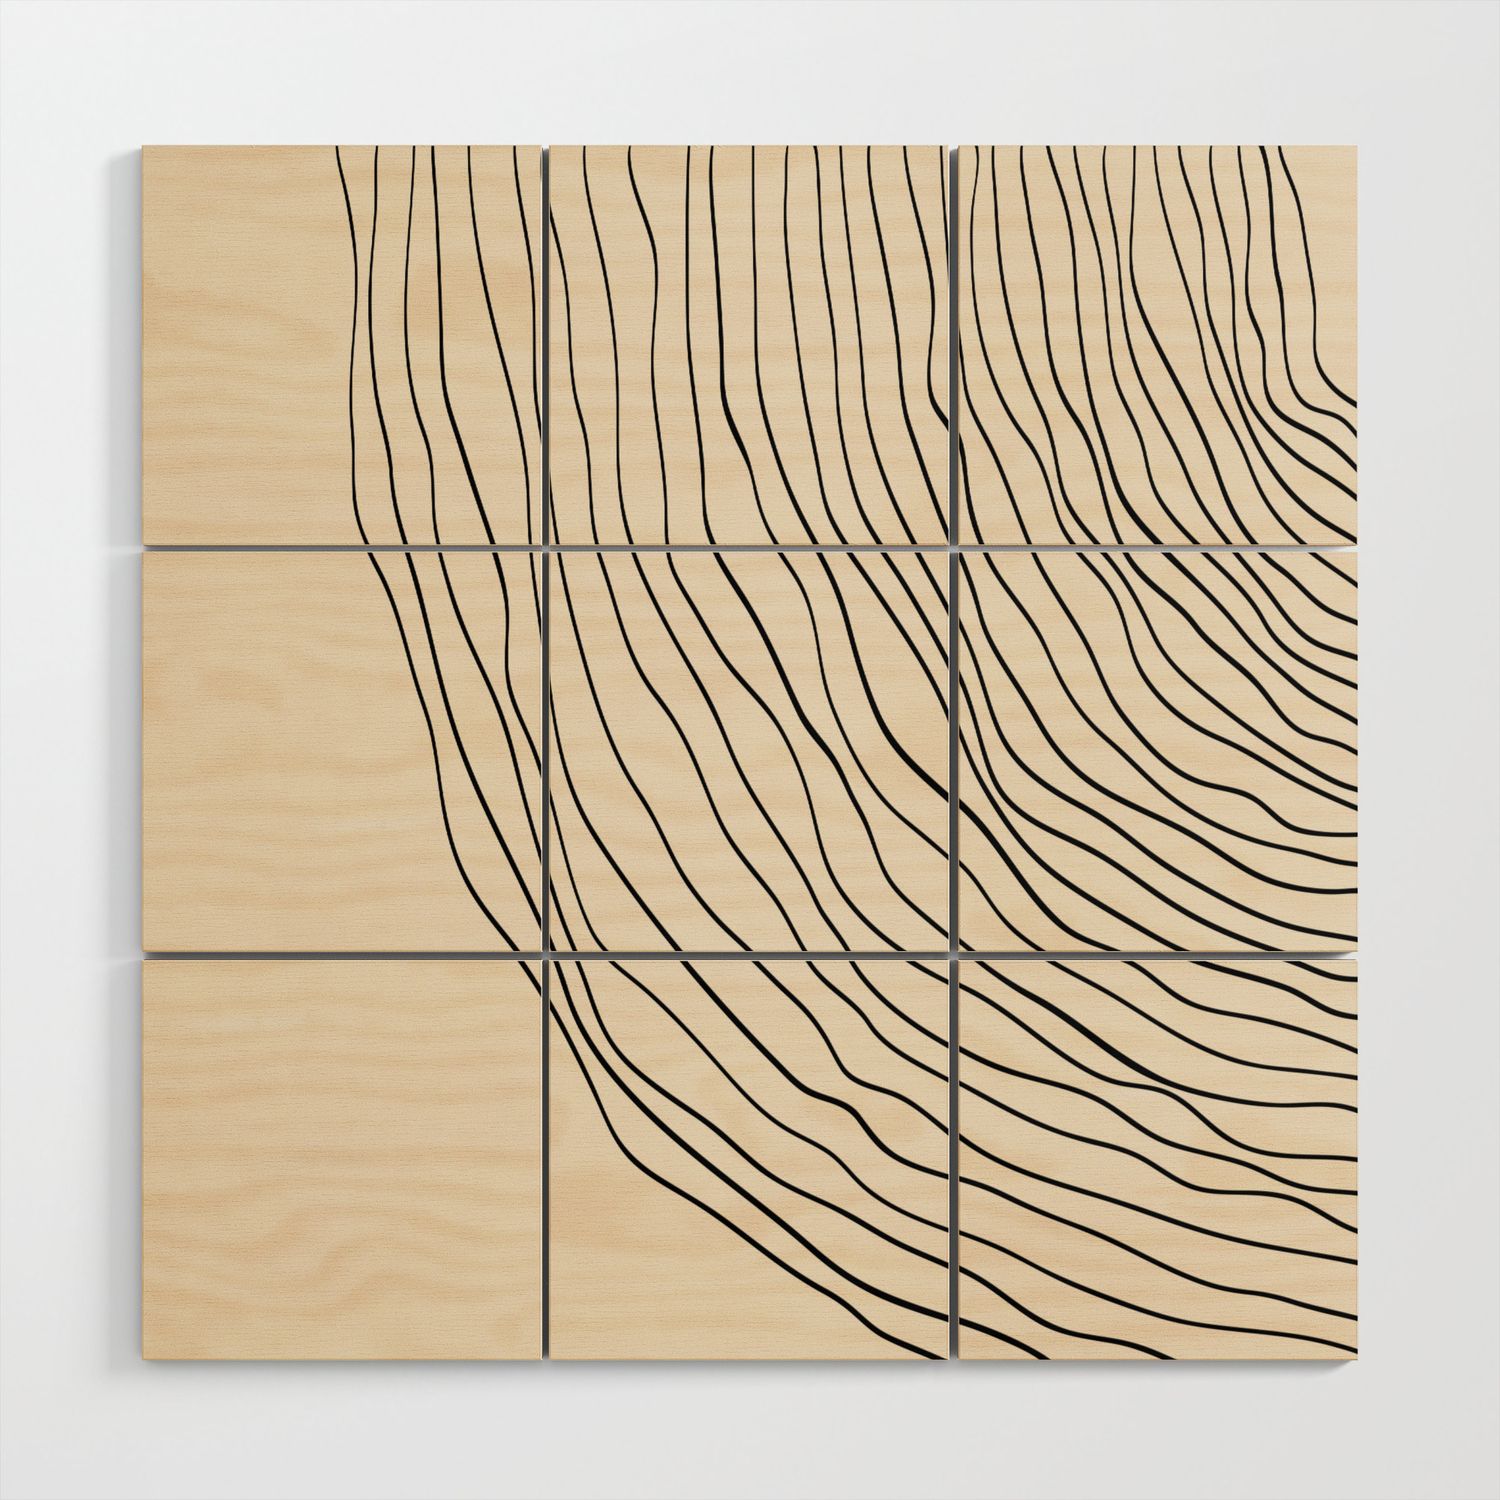 Layers 3 Tan Wood Wall Artthe M Studio | Society6 Within Most Current 3 Layers Wall Sculptures (View 11 of 20)